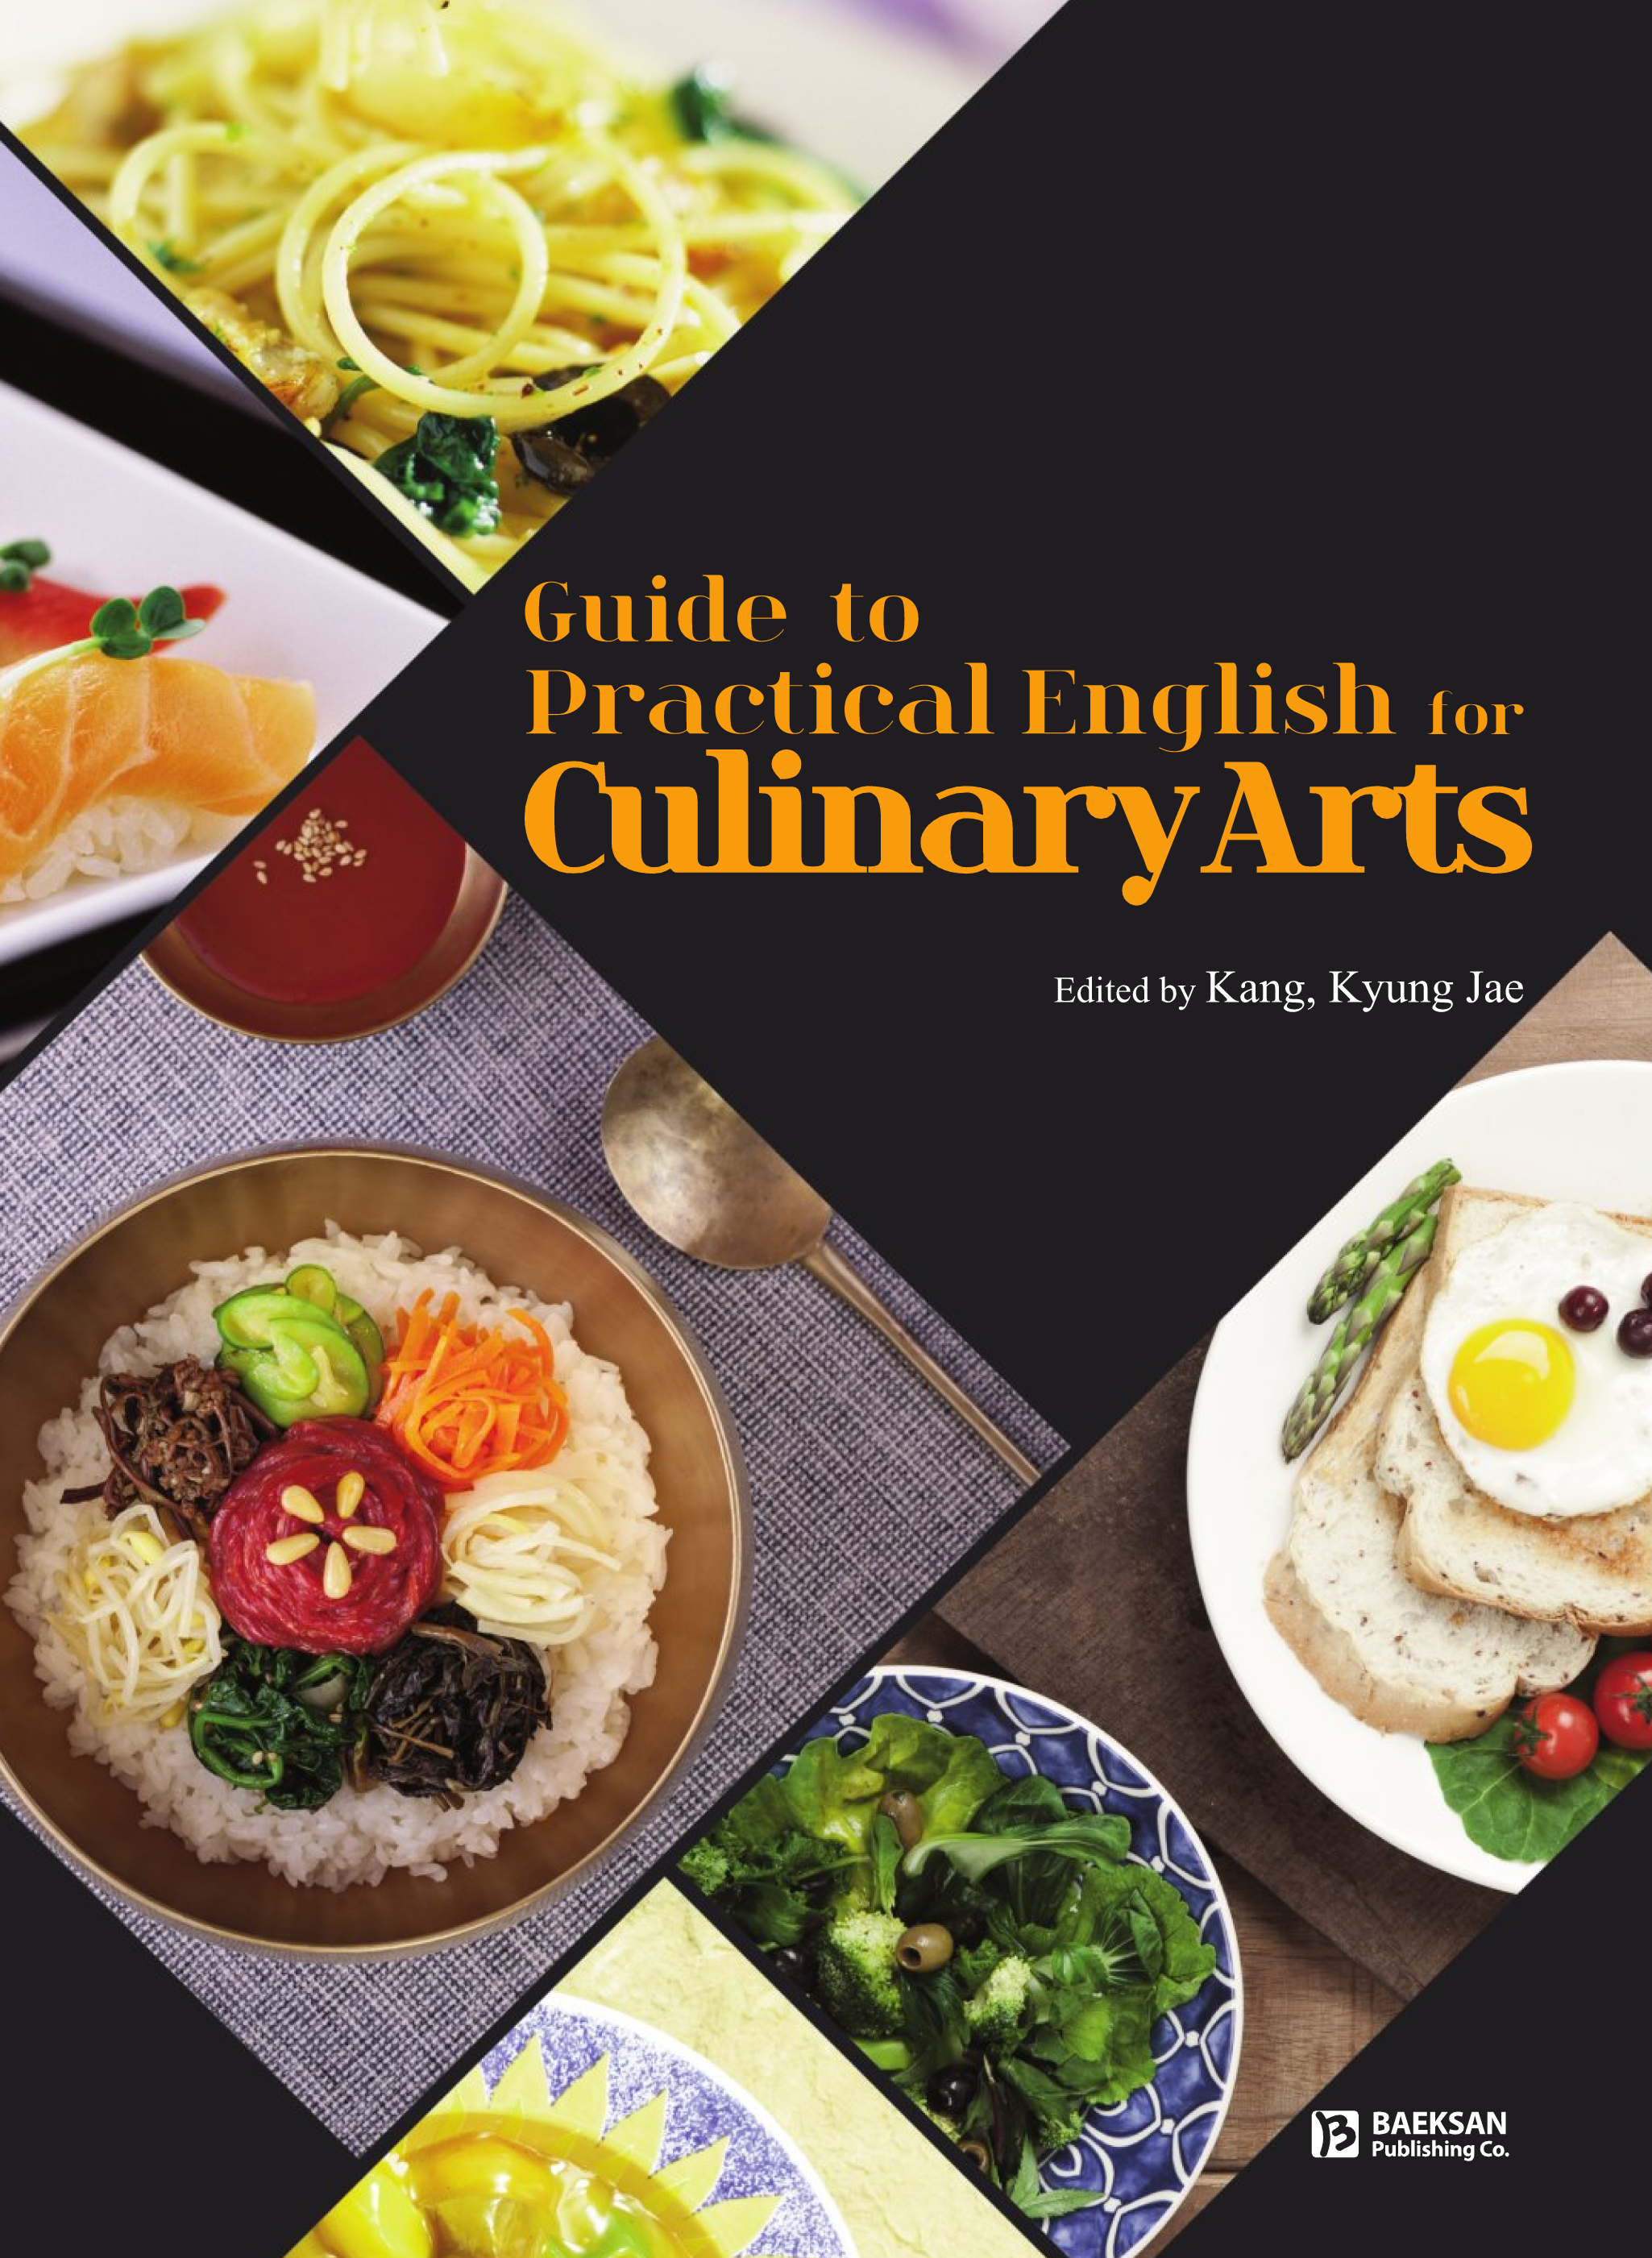 Guide to Practical English for Culinary Arts